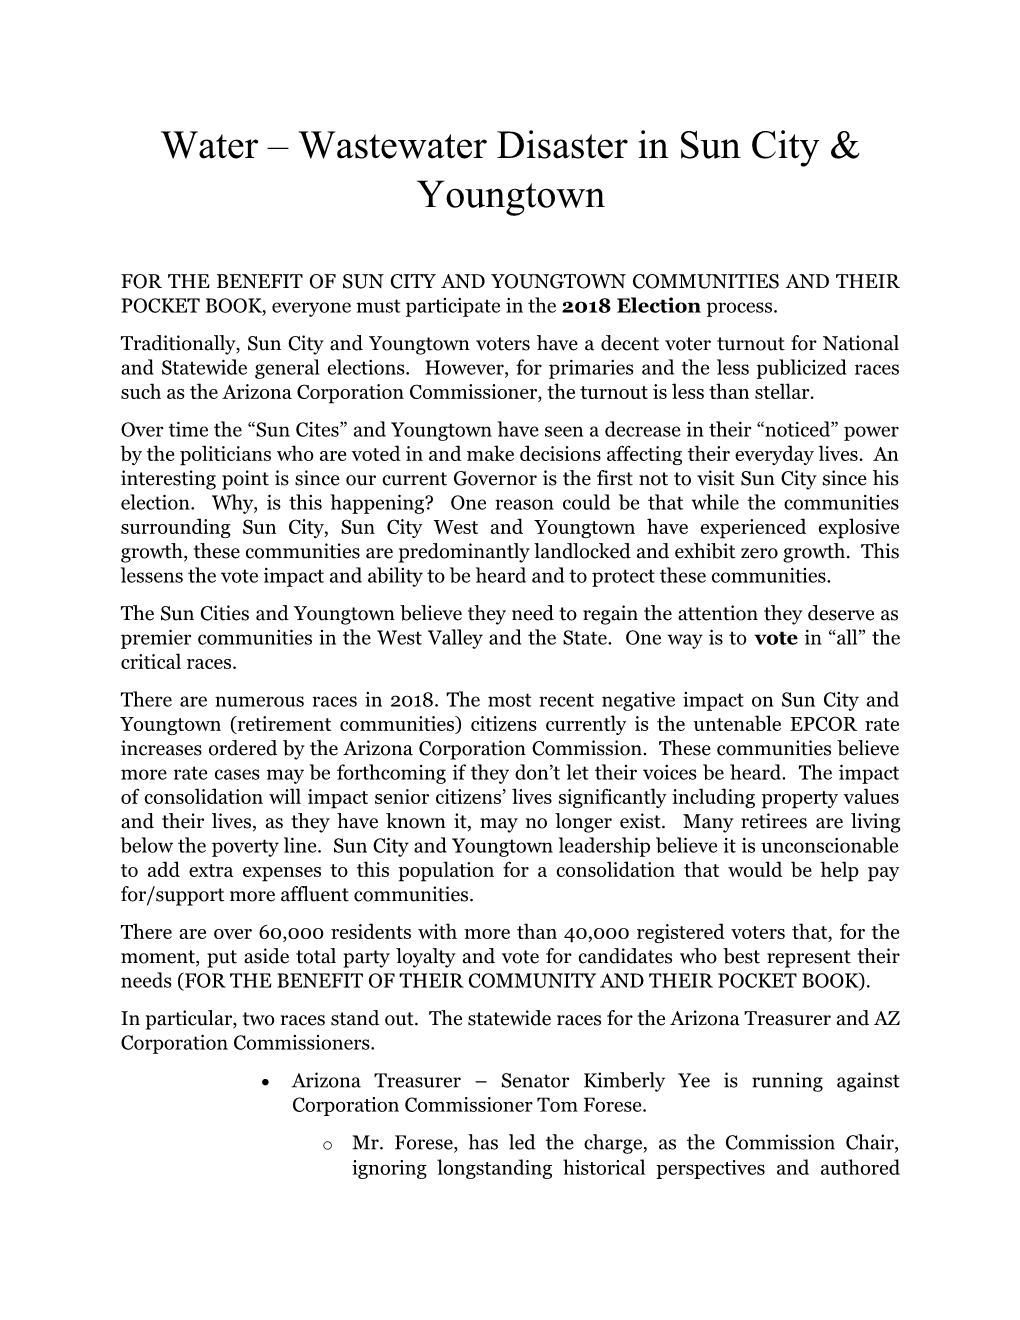 Water Wastewater Disaster in Sun City & Youngtown